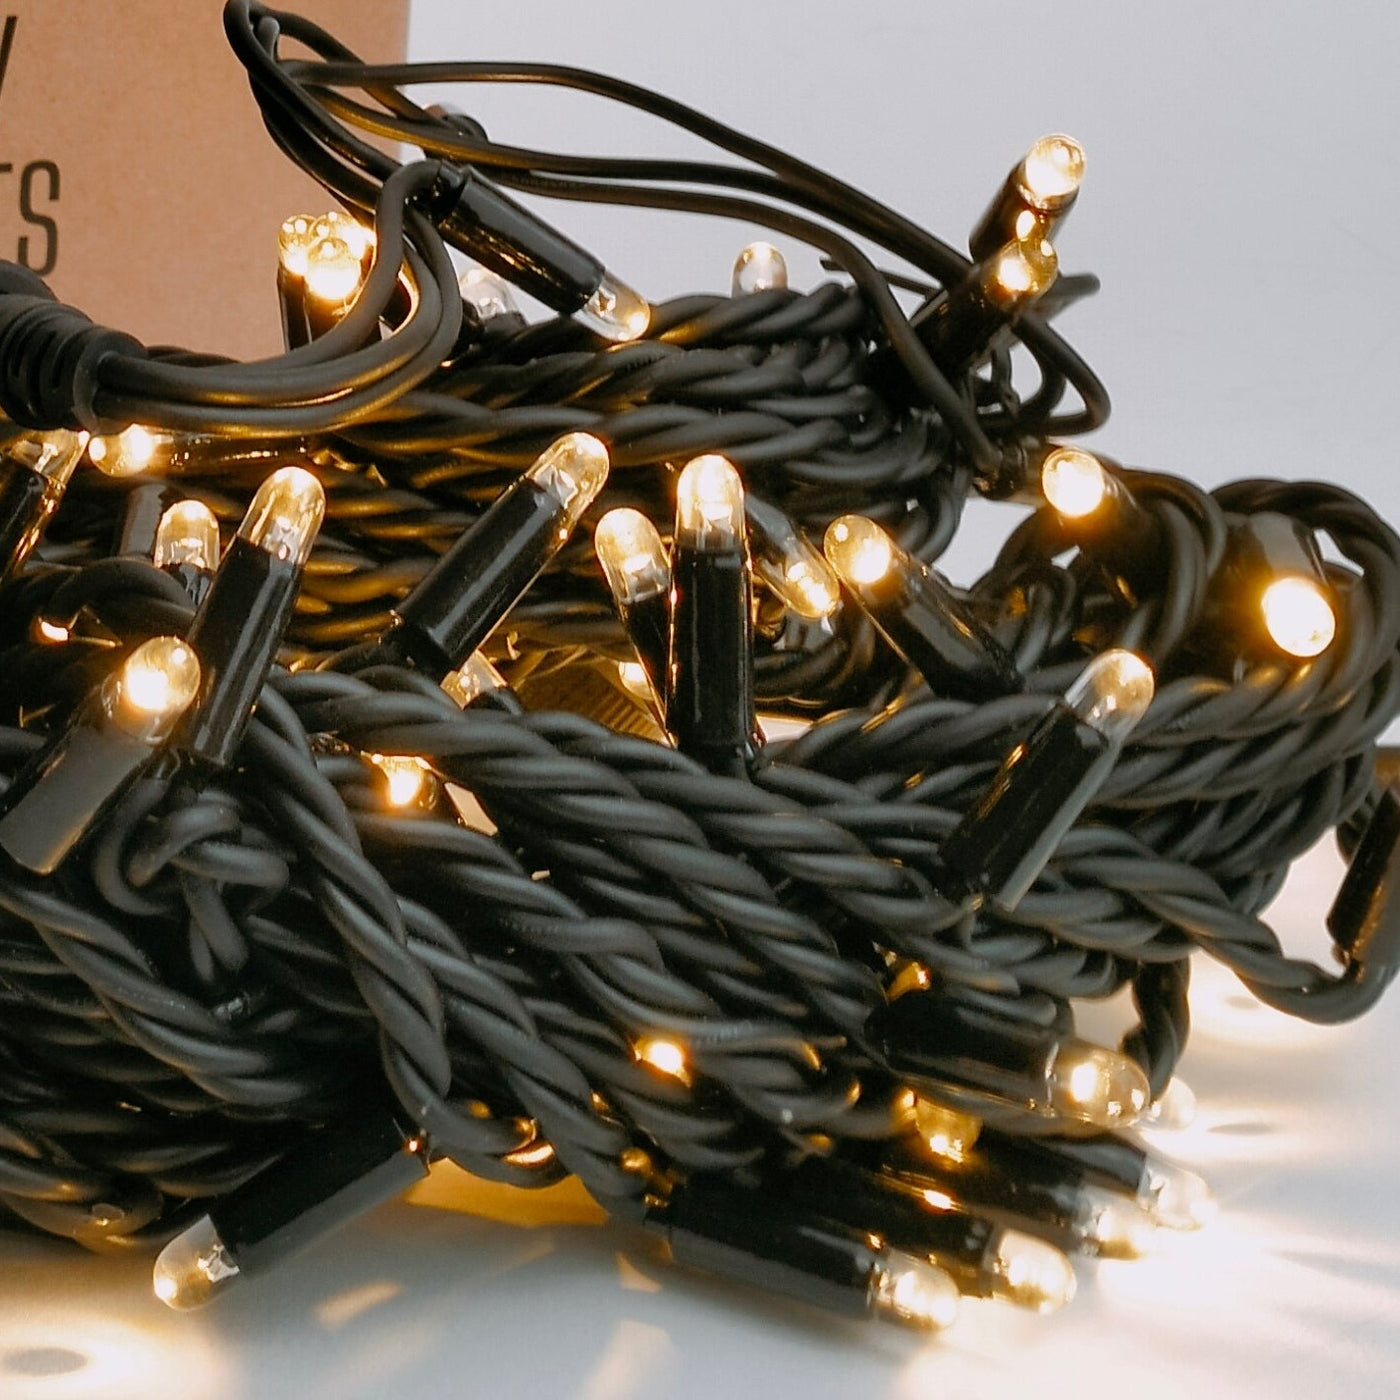 Low Voltage Fairy Lights  | Pro Series | 10m Black Rubber Cable | Connectable | Outdoor